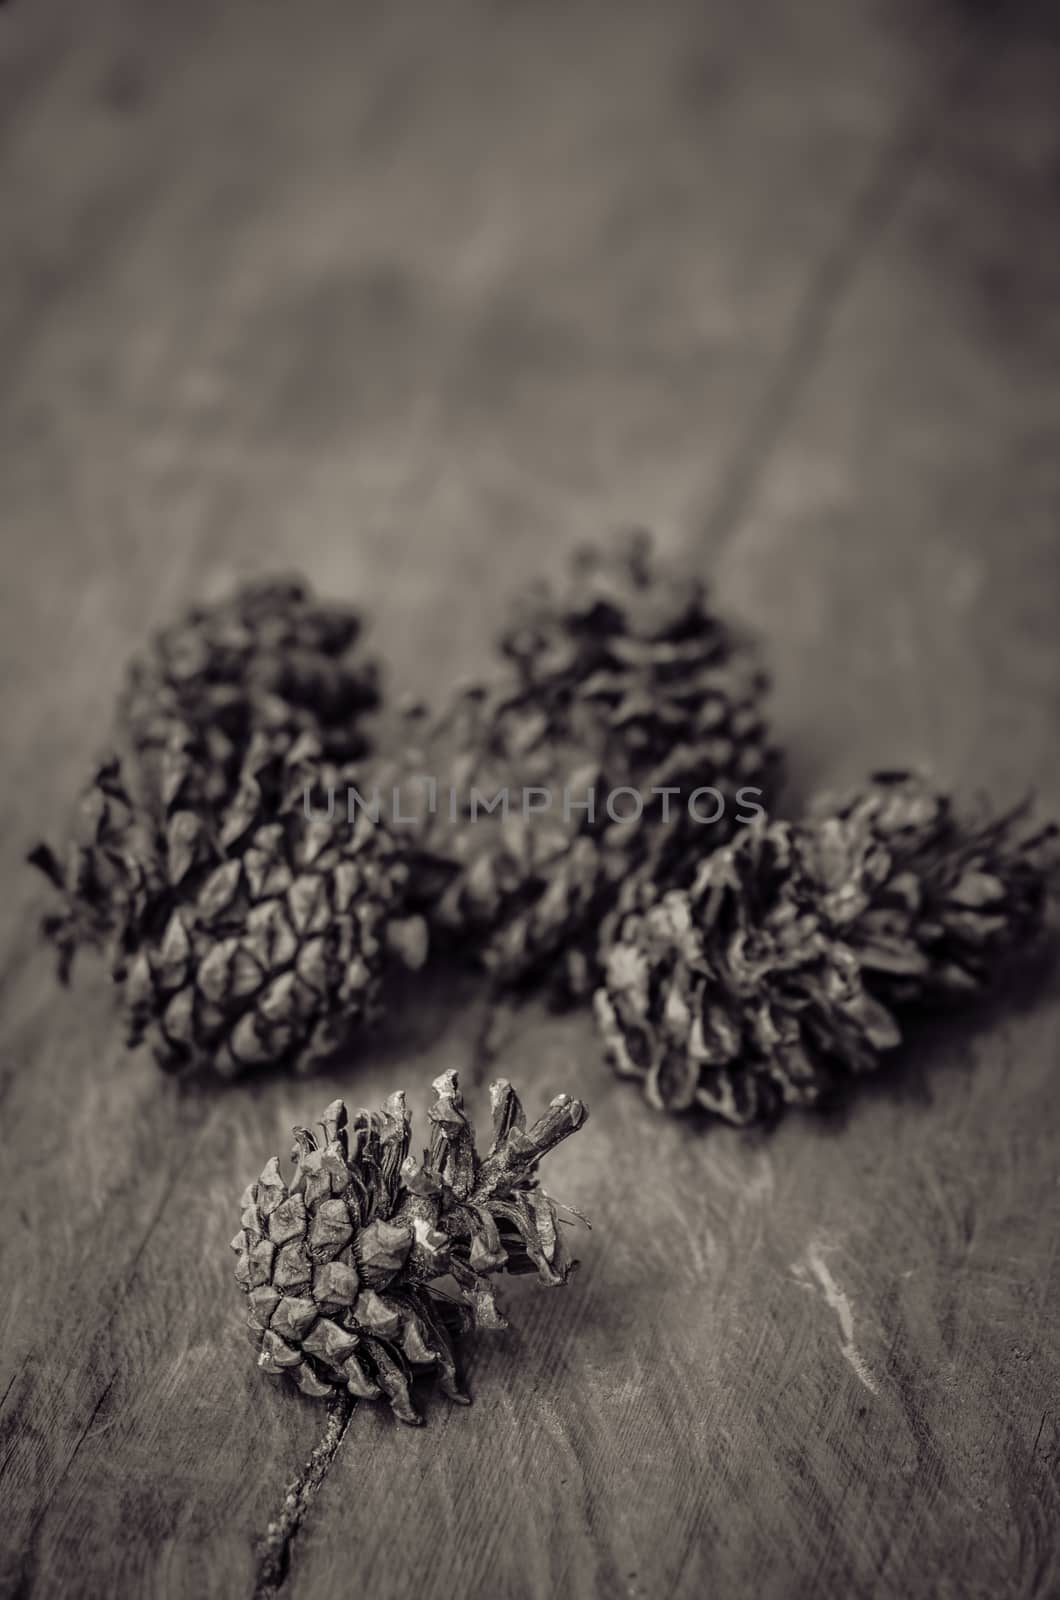 Conifer cone on wooden background, Vintage style